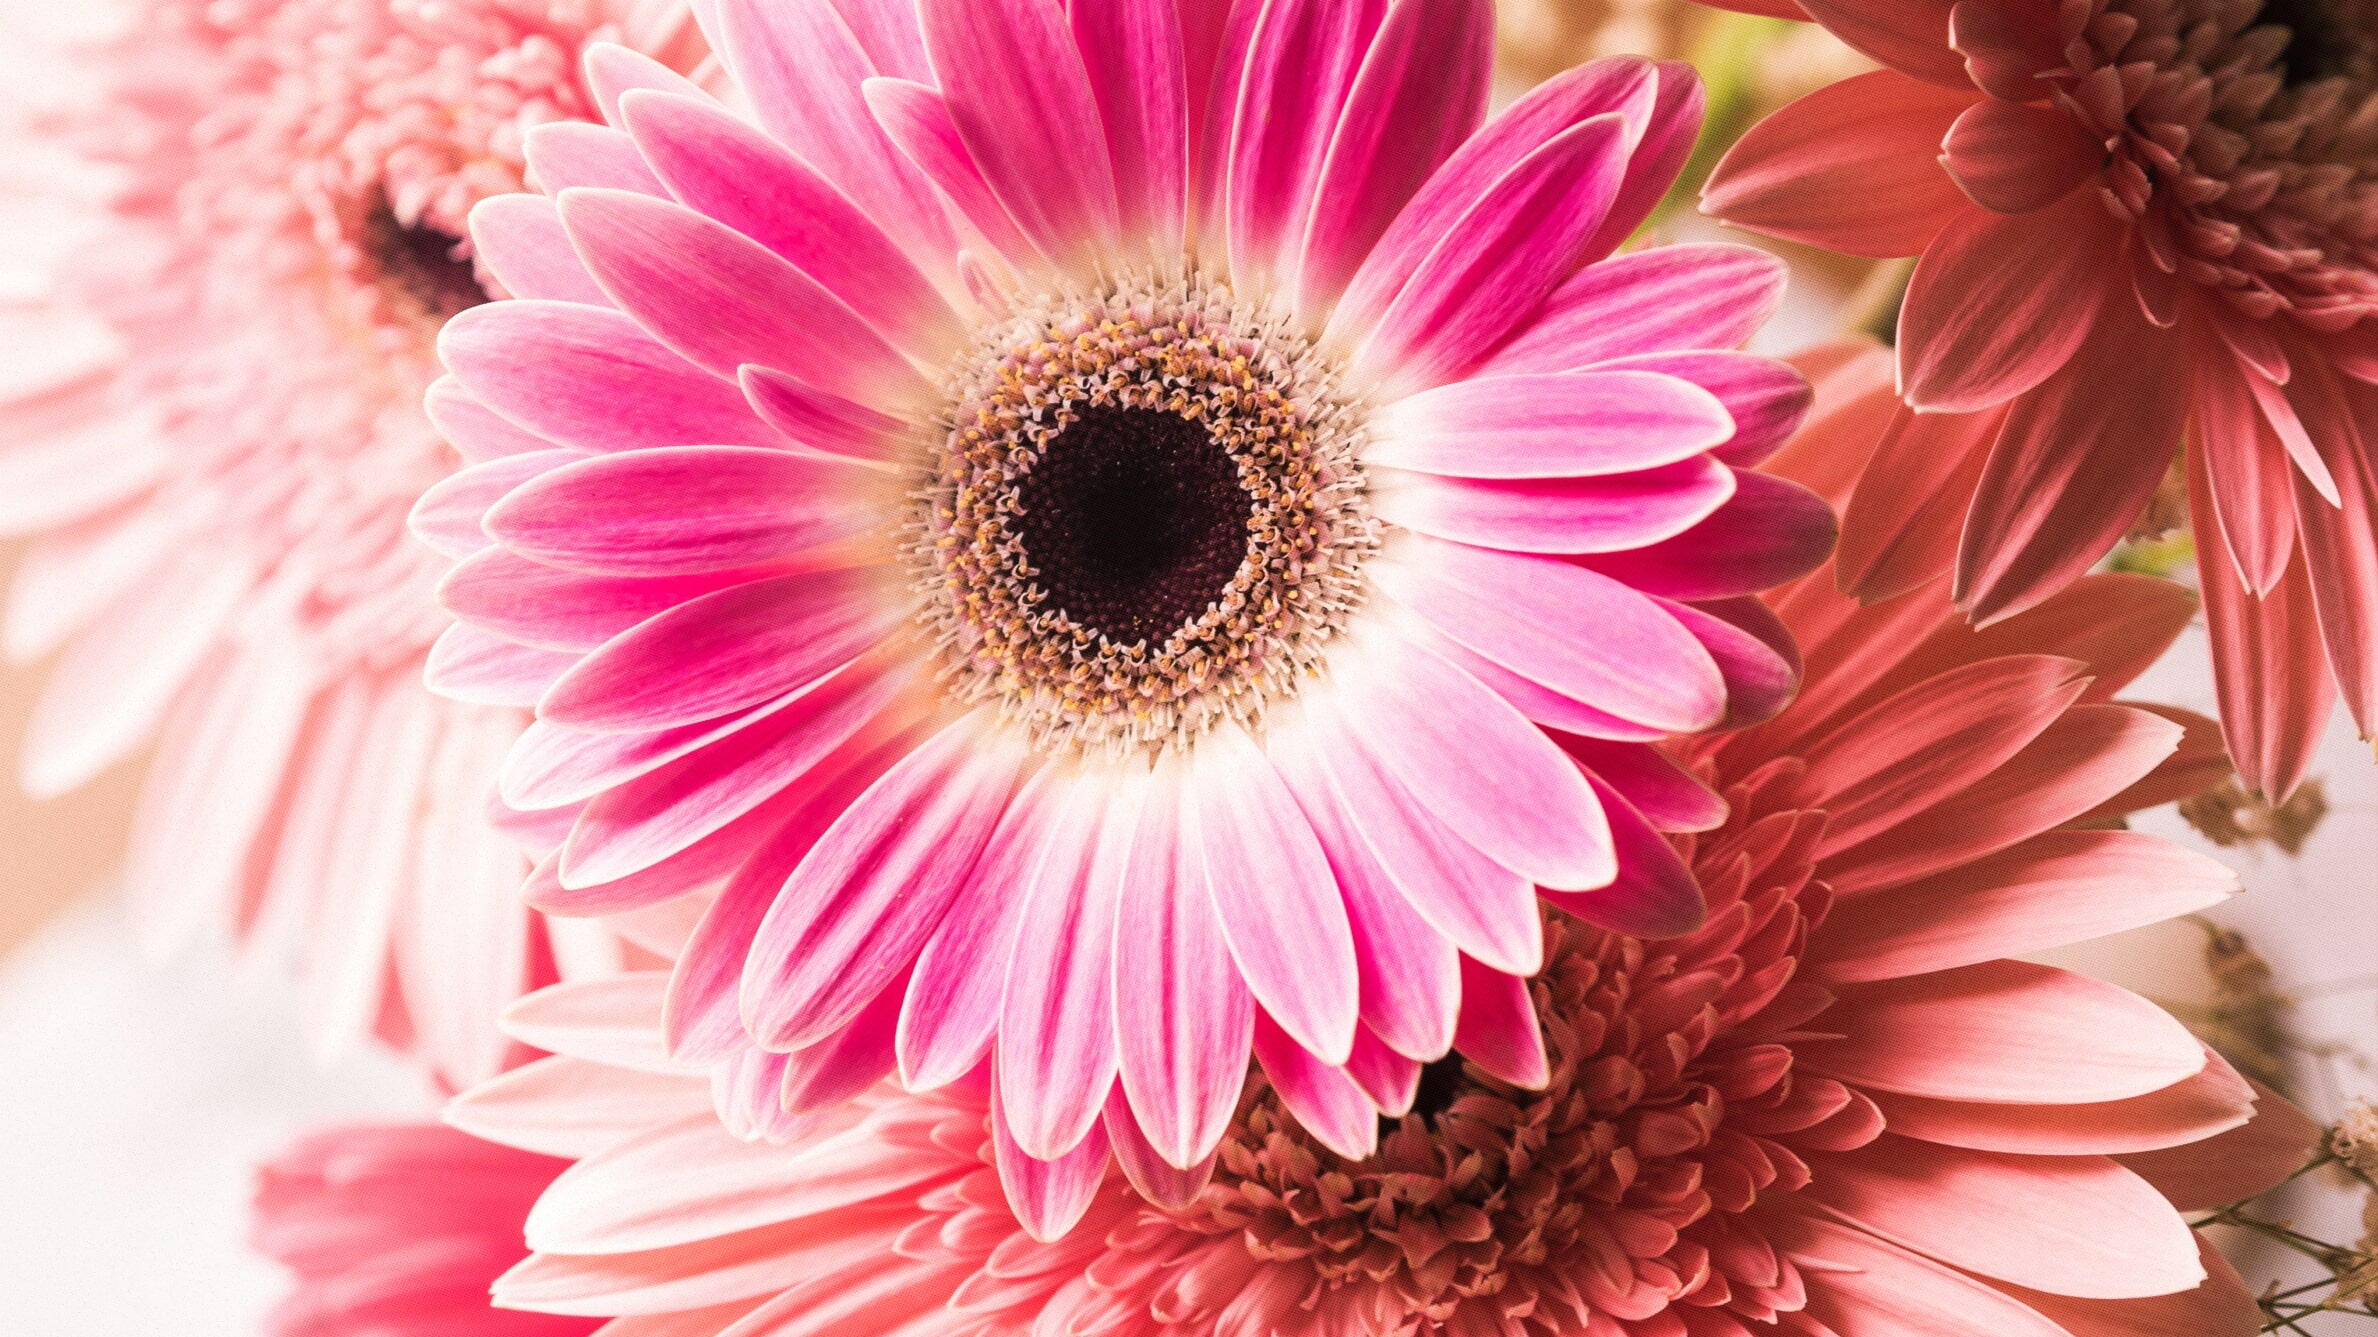 Gerbera Daisies for Mothers Day